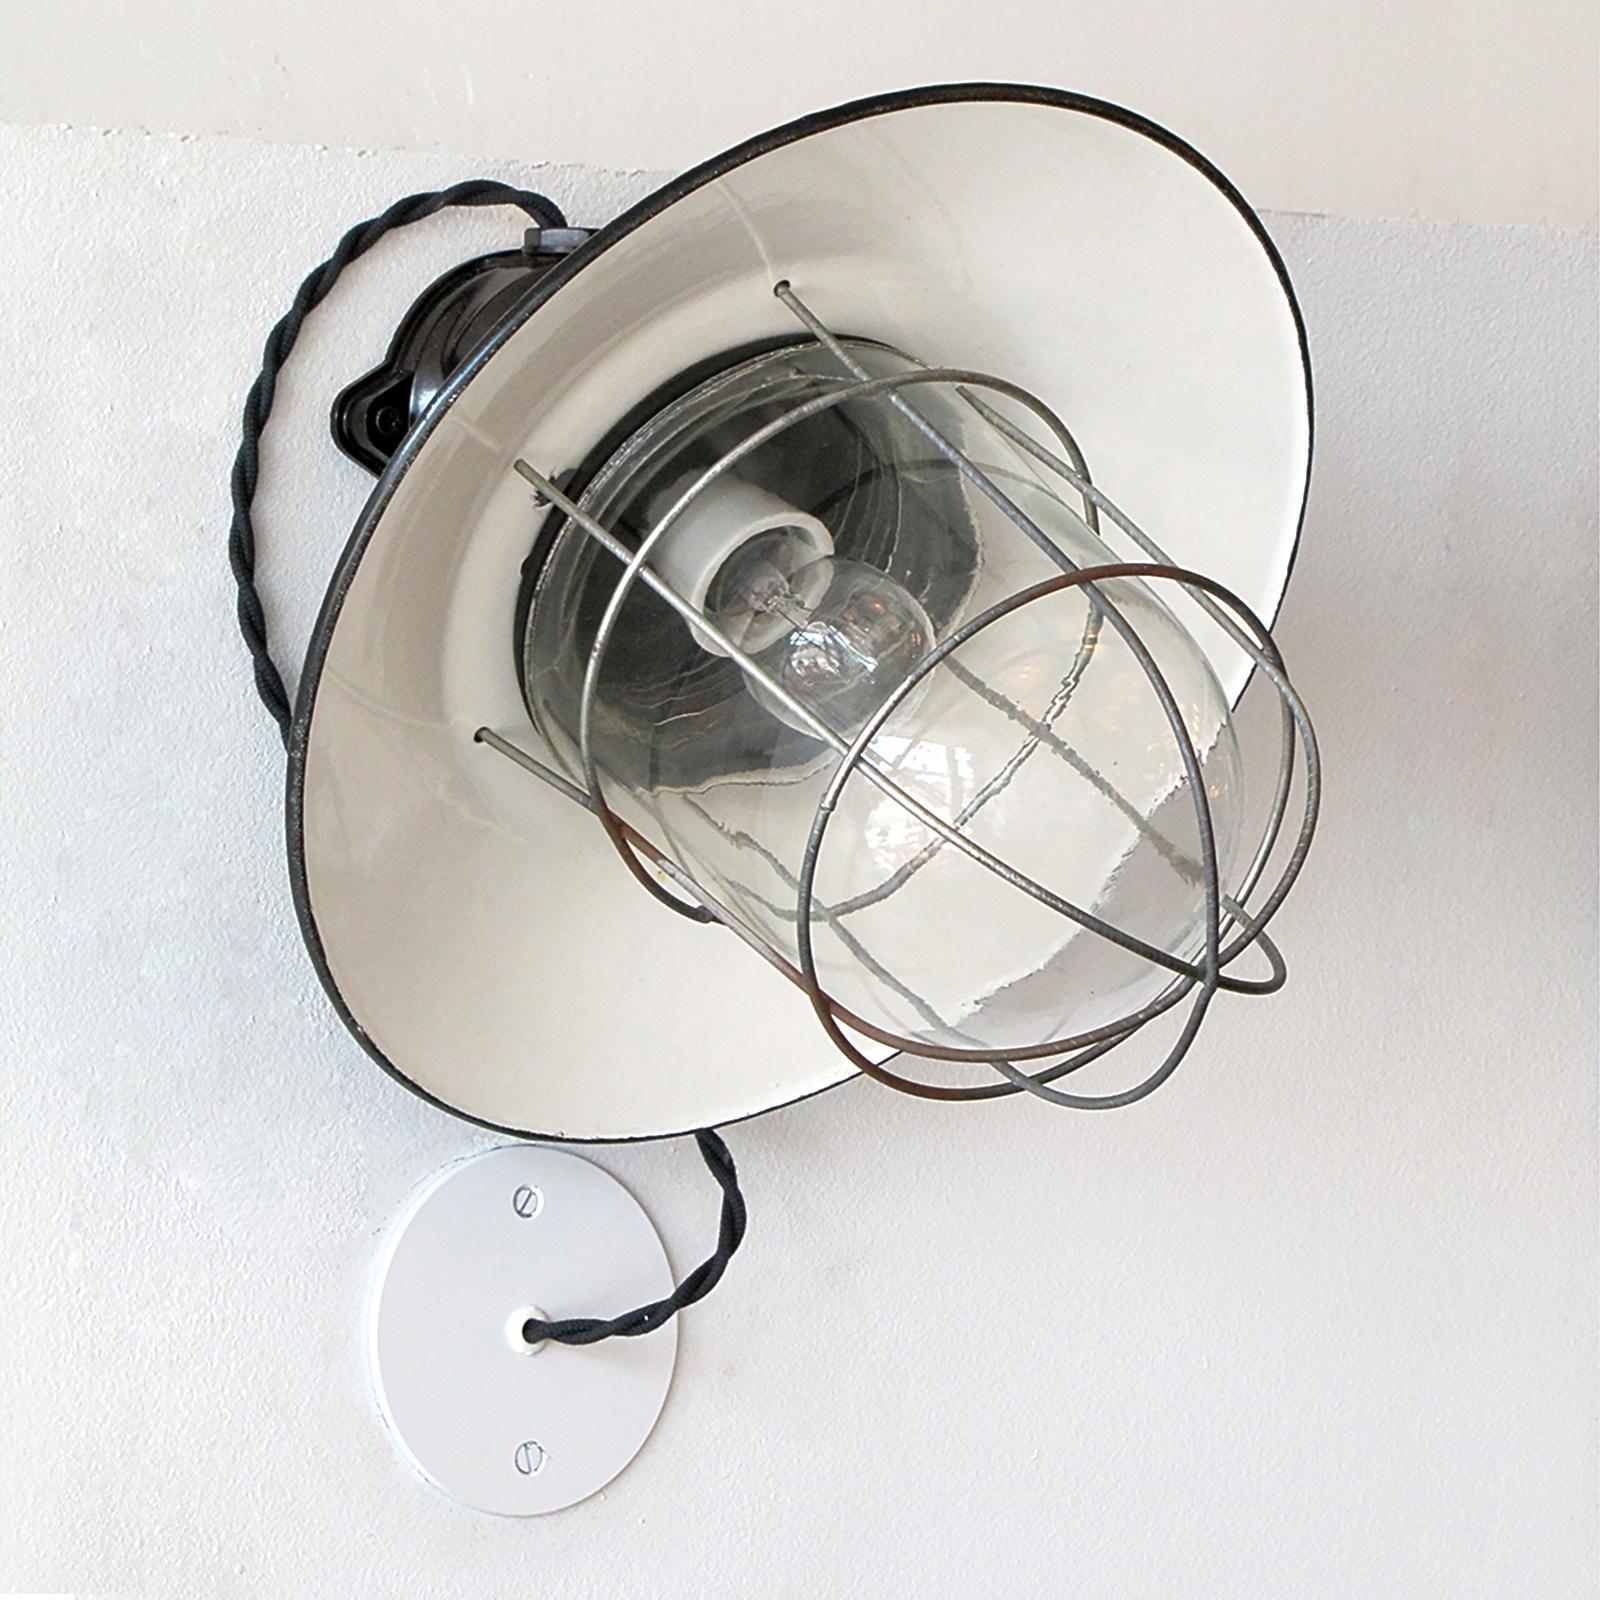 Great pair of German Industrial wall lights with bakelite housings, enameled metal shades and a metal cages enveloping glass domes, currently wired with external j-box covers, wired for US standards, one E27 socket per fixture, max. wattage 100w,